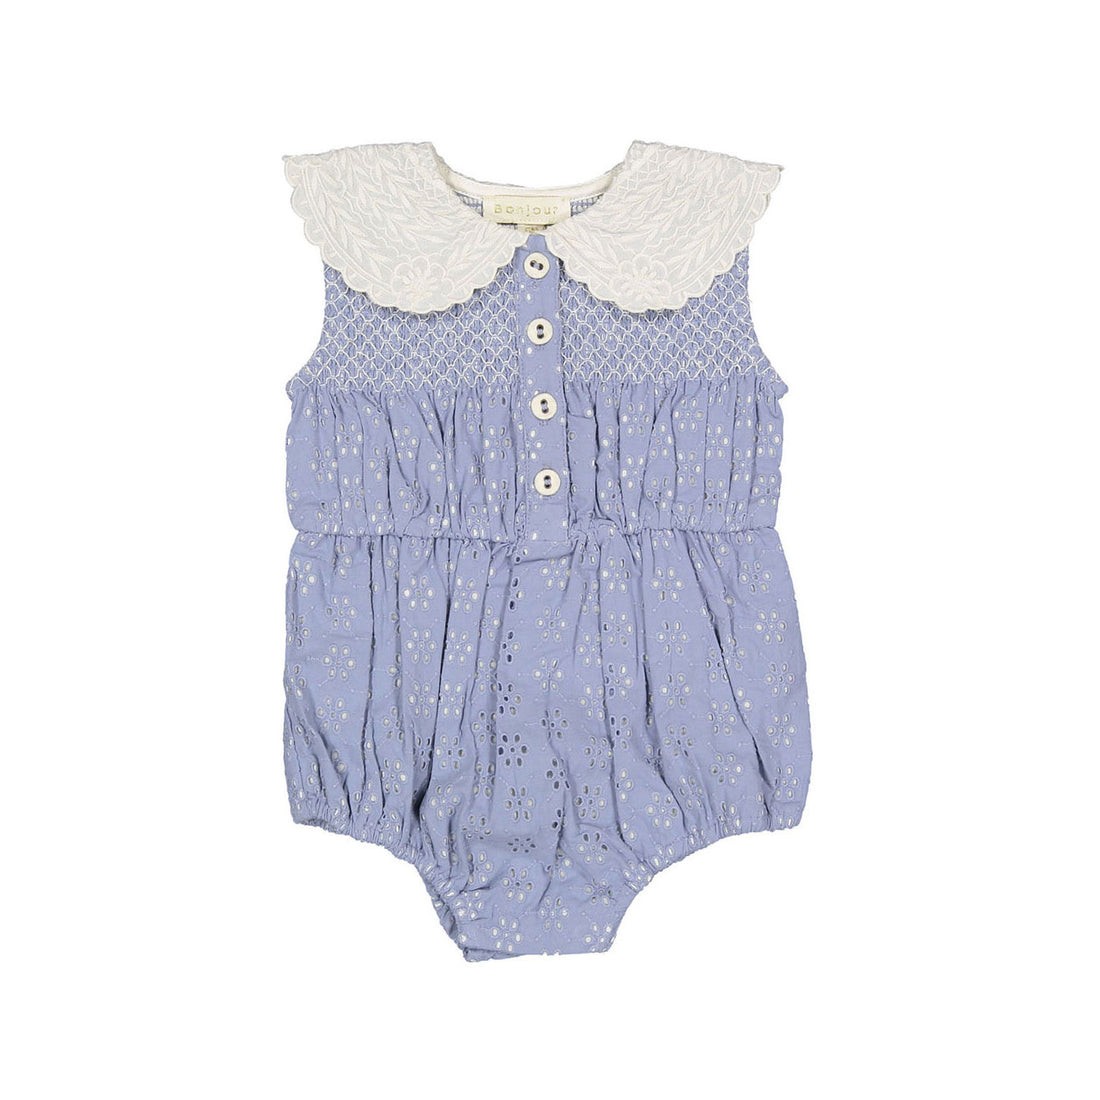 Bonjour Blue Broderie Anglaise Baby Romper